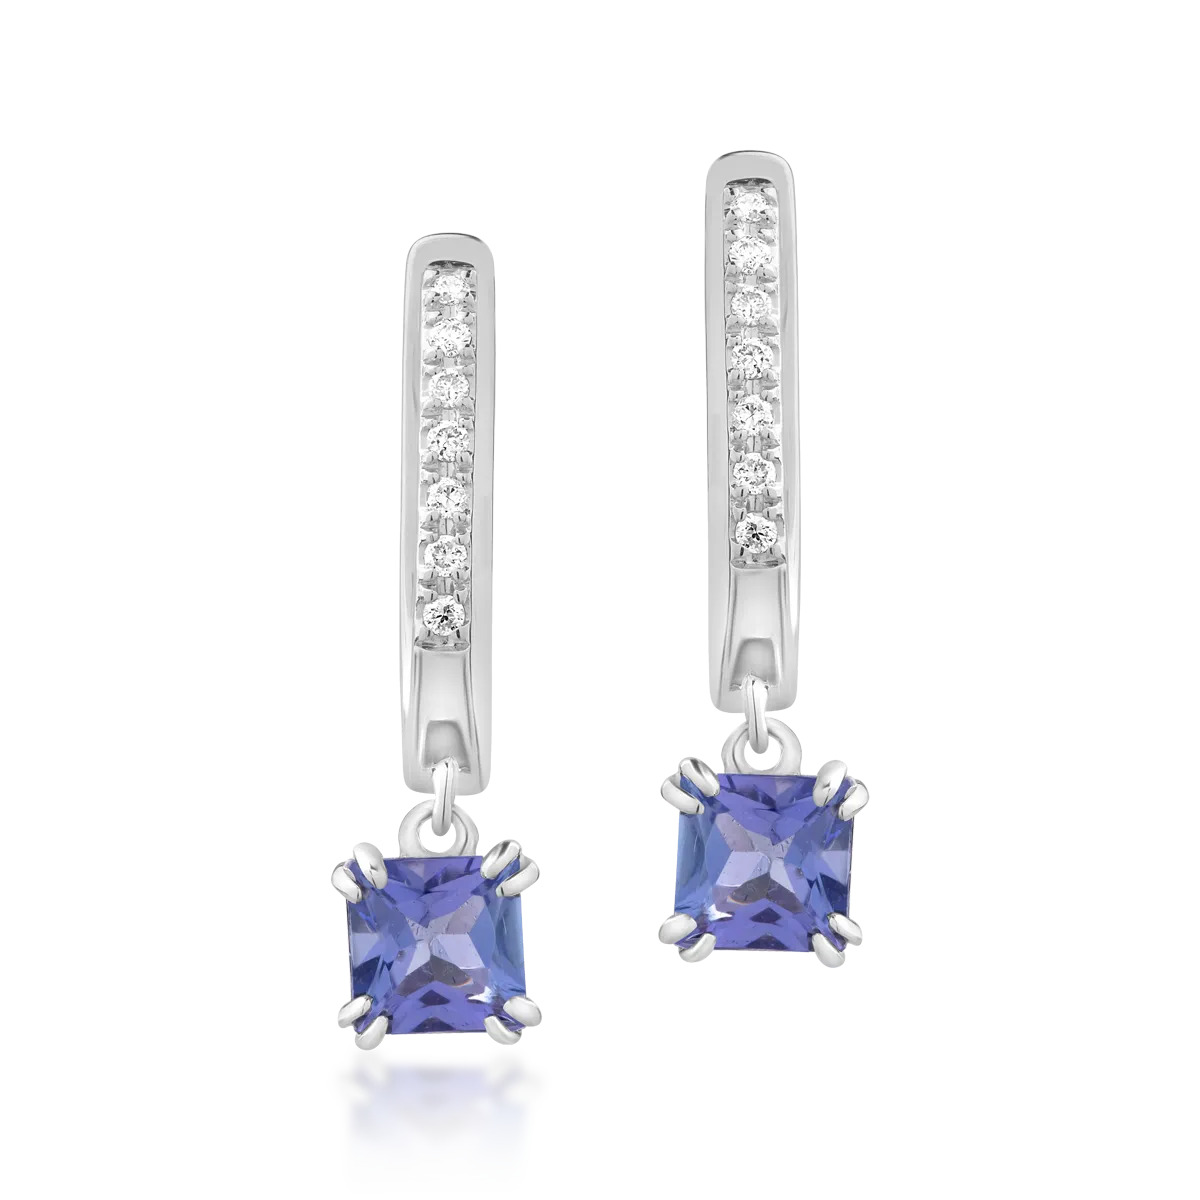 18K white gold earrings with tanzanite of 0.775ct and diamonds of 0.05ct